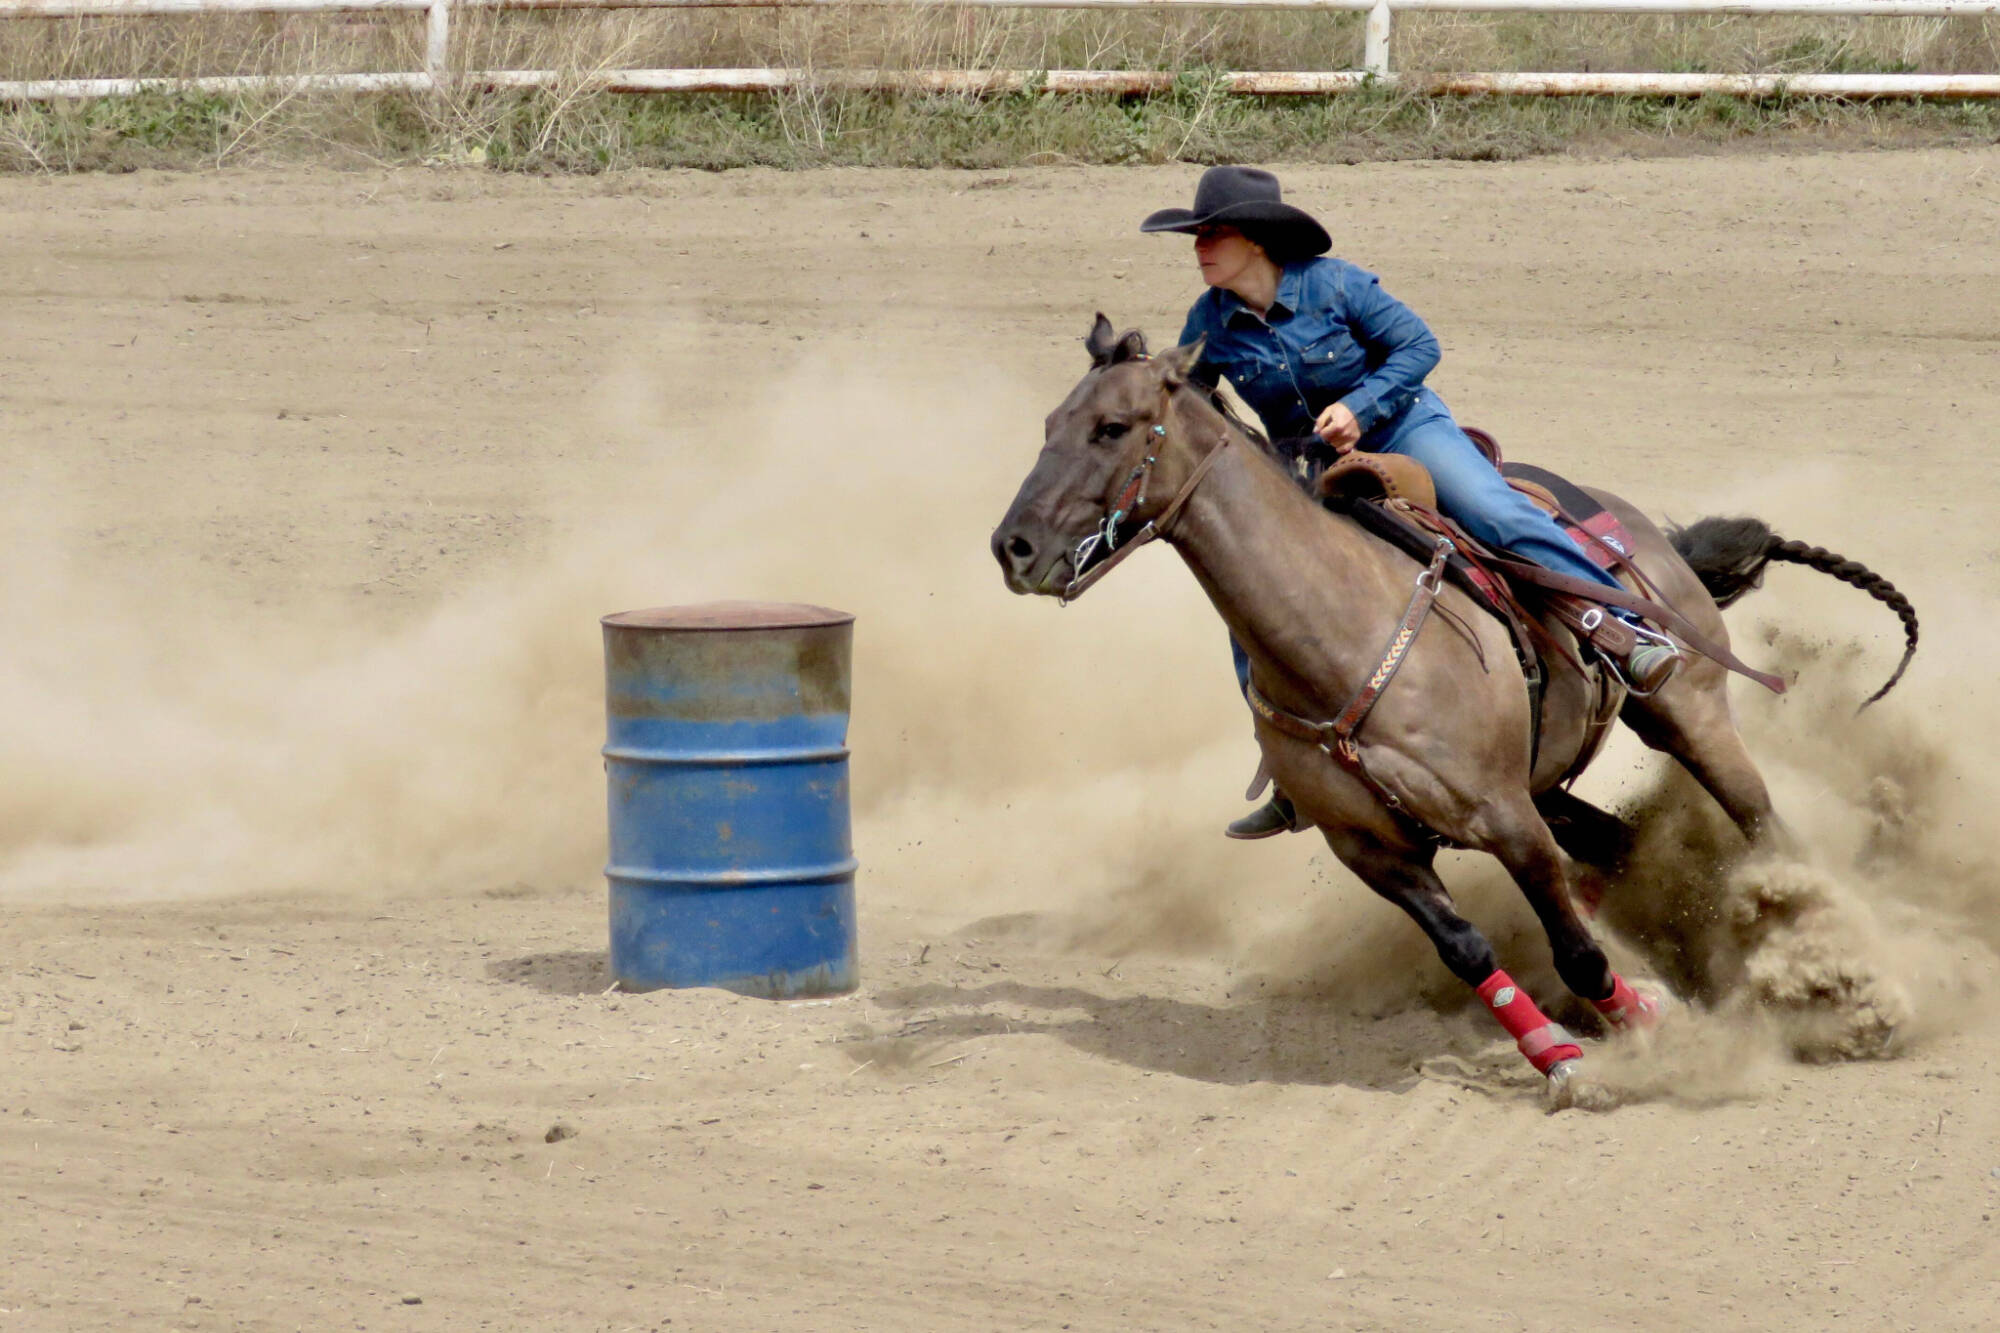 The Keremeos Elks hosted barrel racing at the rodeo grounds on Victoria Day. Guests got to take in the amazing speed and agility of horse and rider. (Susan Chaworth-Musters photo)